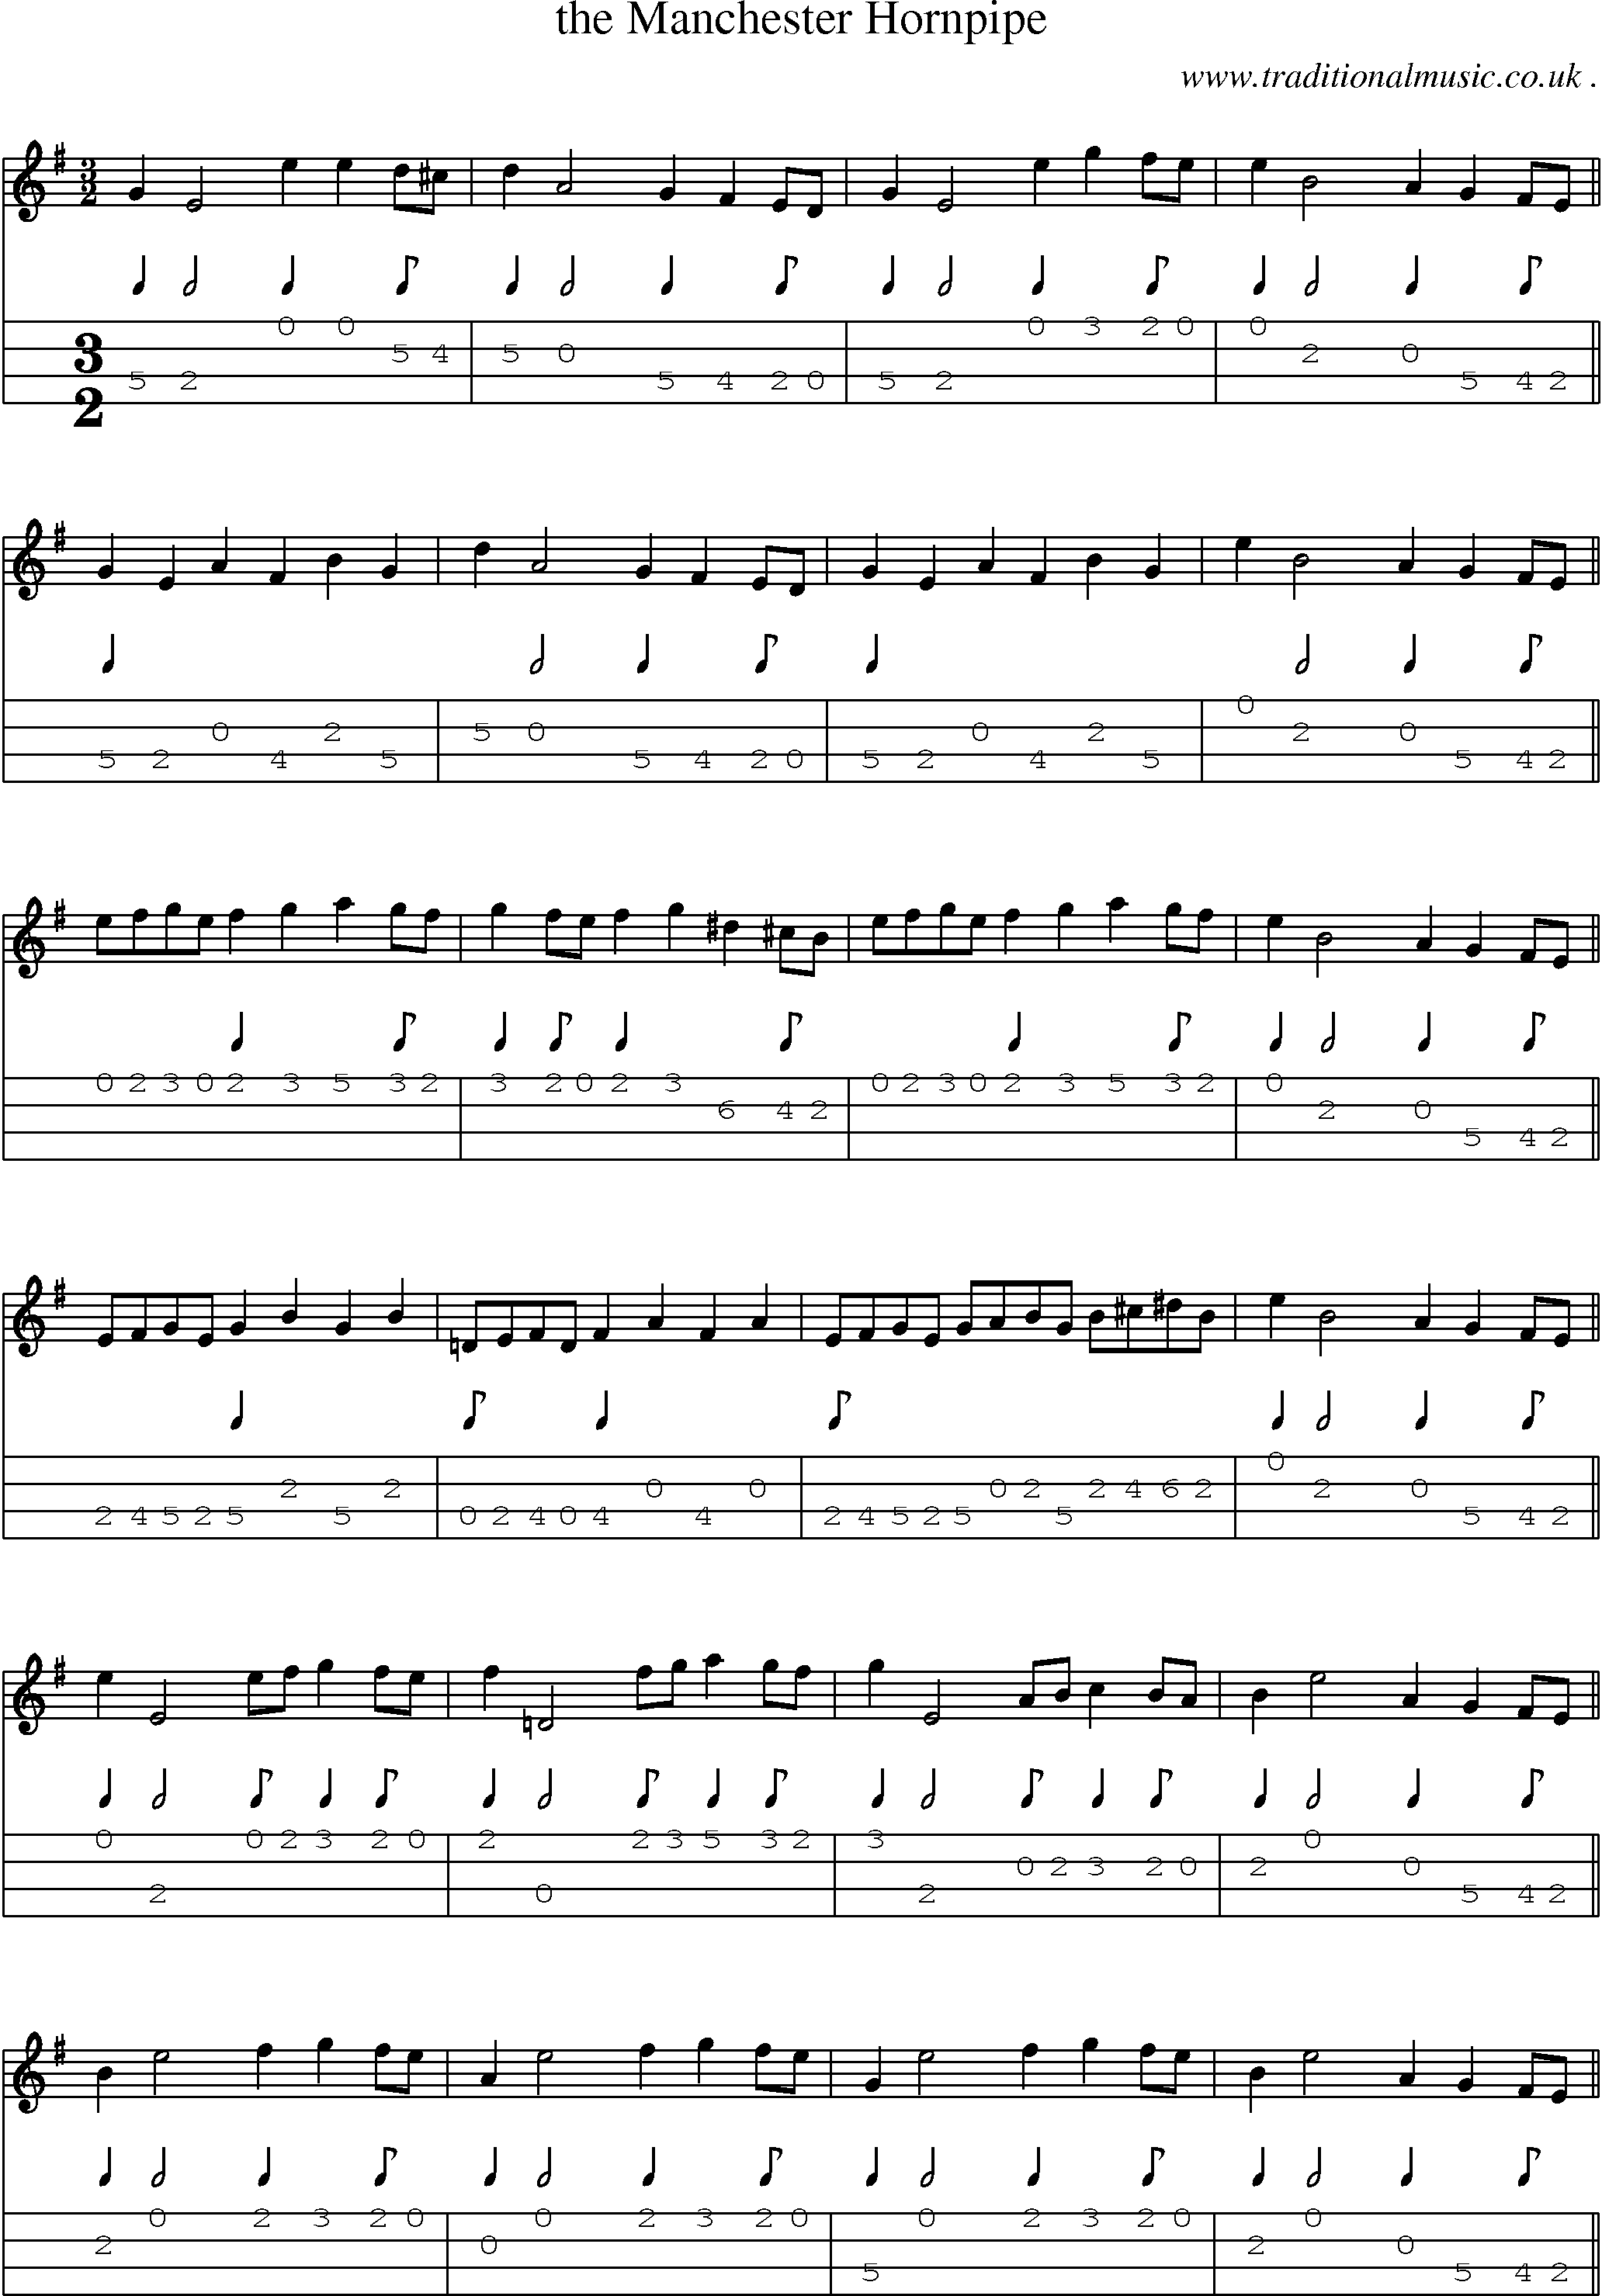 Sheet-Music and Mandolin Tabs for The Manchester Hornpipe